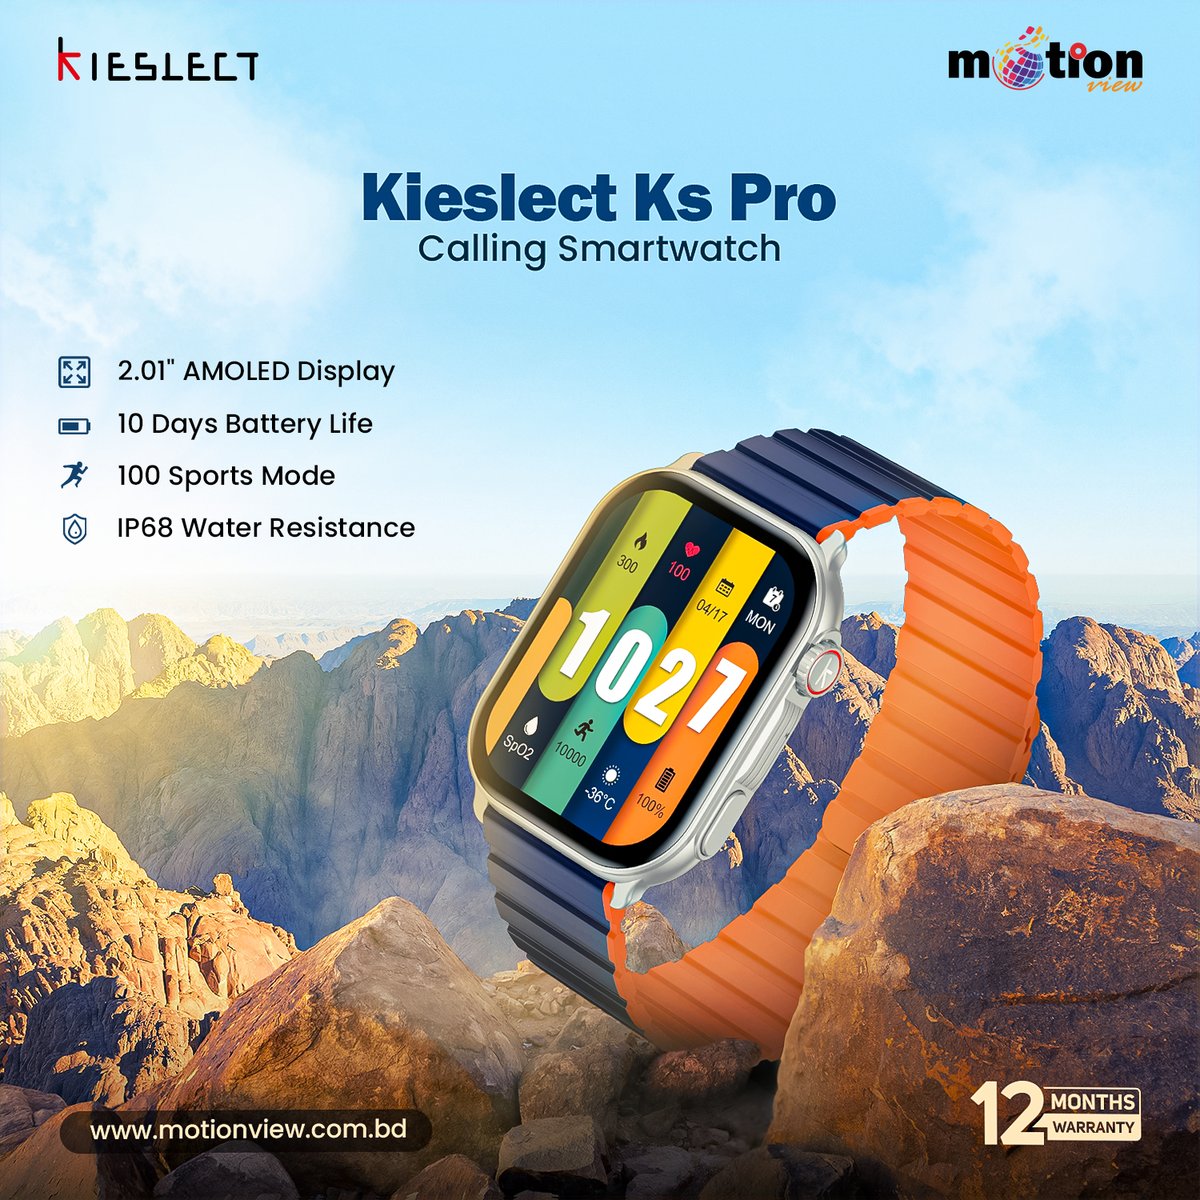 Are you looking for a smartwatch? Have you seen Kieslect KS Pro? Stylish, fitness tracking has it all! What do you think? 😎

#Motionview #KieslectKSPRO #AMOLED #FitnessTracker  #IP68